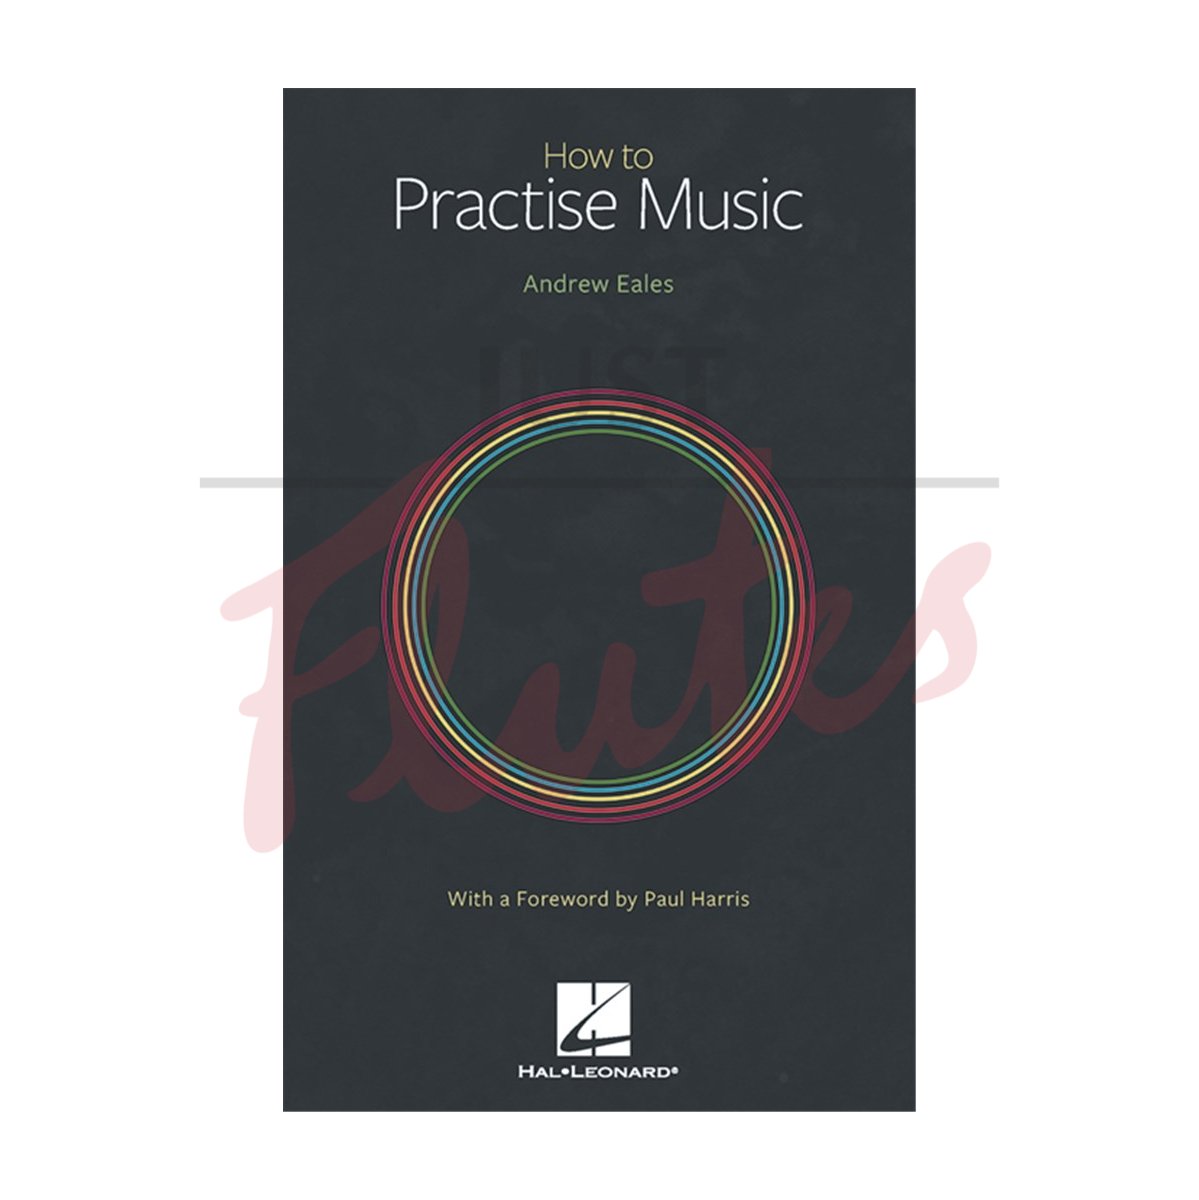 How to Practise Music